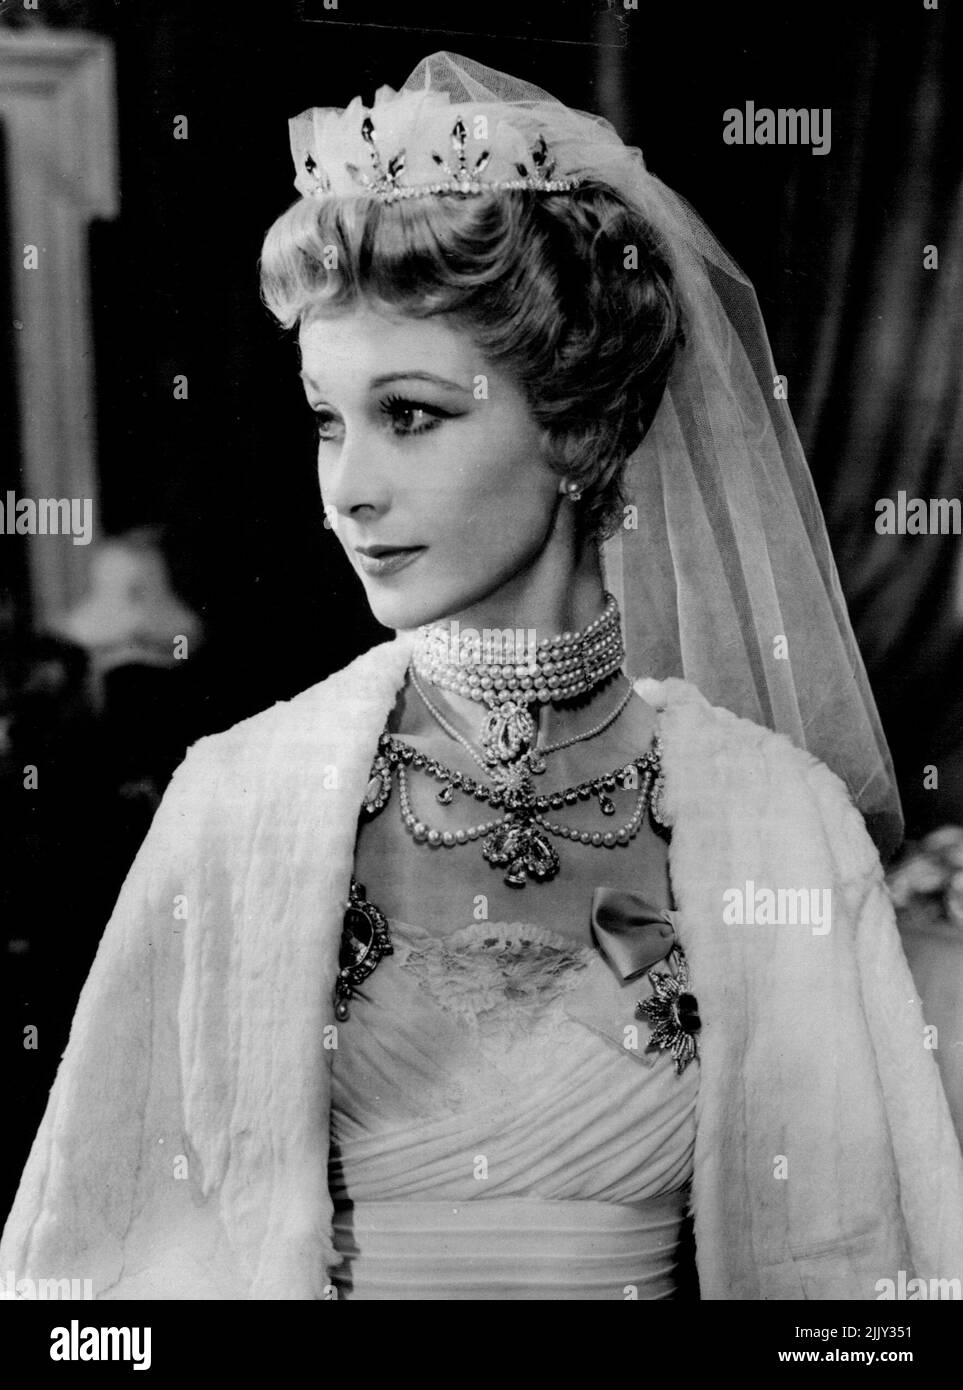 Princess Will Gasp At This Vision Of Vivien - Even Princess Margaret will gasp with delight when she sees this lovely vision - Vivien Leigh - walk on the stage at the Phonix Theatre, London, in the new Terence Rattigan comedy, 'The Sleeping Prince'. Vivien, dressed in the 1911 period, with a blonde wig, white evening dress and a pale blue frilly shoulder wrap will also wear pearls as she plays the part of Elaine Dagenham. The Princess will see her tomorrow (Tuesday) when she attends one of the charity performances which precede the opening on Thursday. October 31, 1953. (Photo by Reuterphoto). Stock Photo